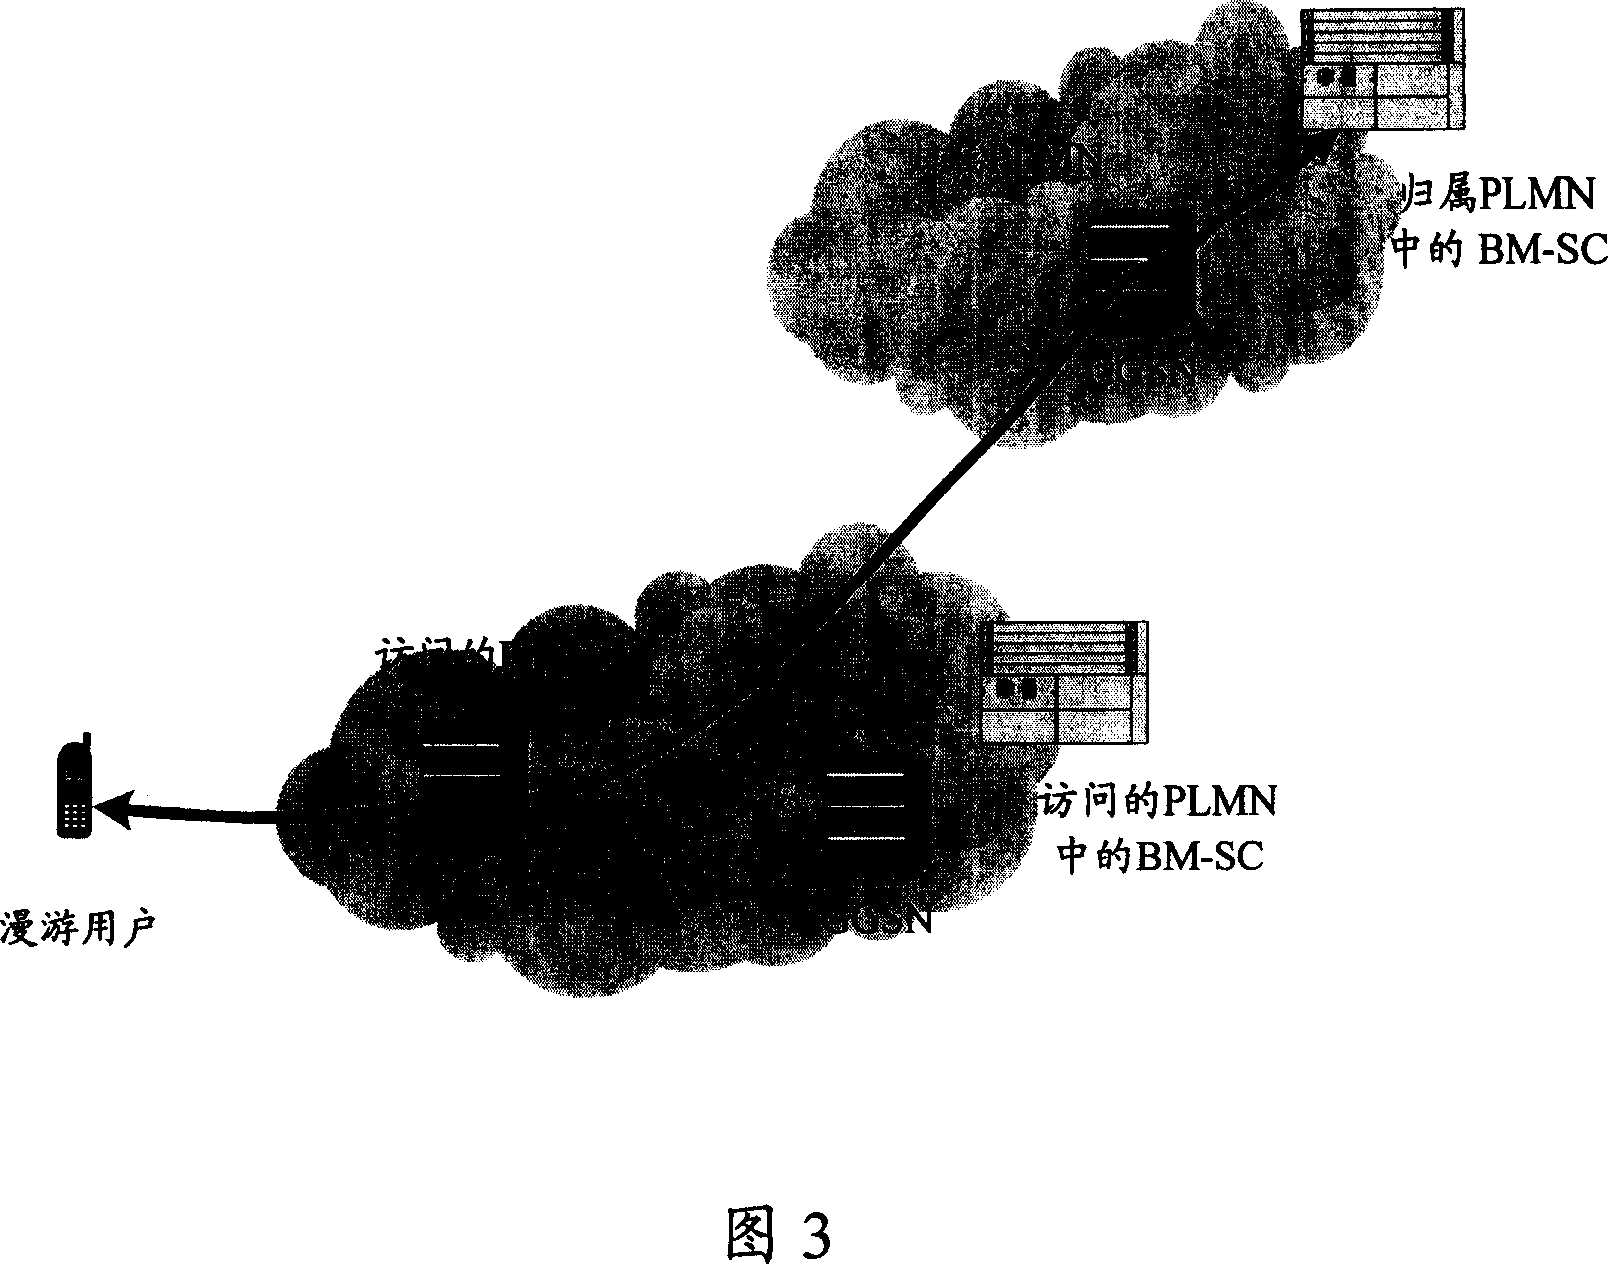 Method for providing multicast service to nomadism users and communication system